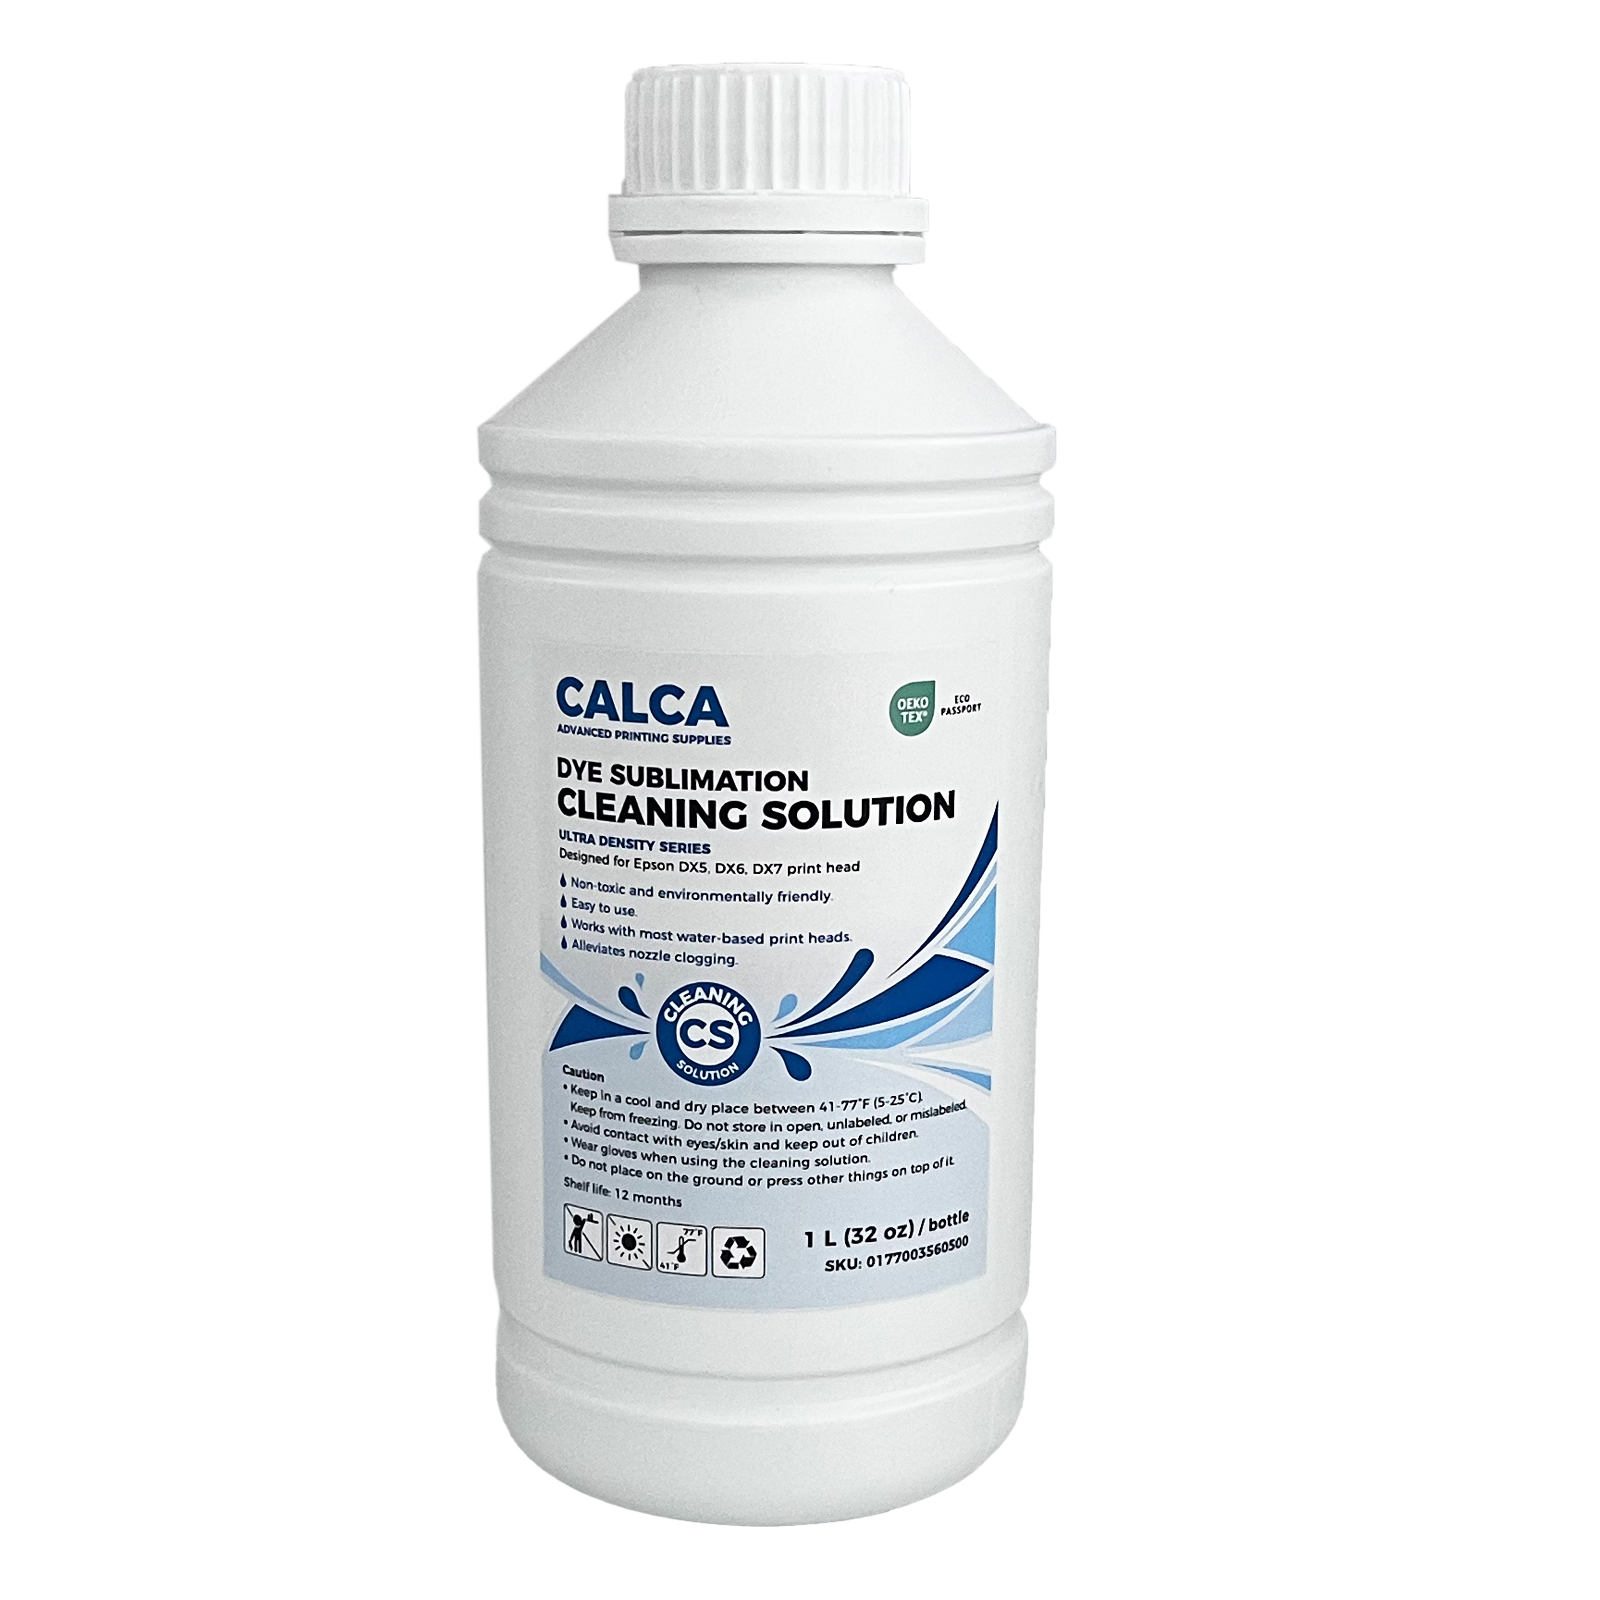 CALCA Ultra Density Series Dye Sublimation Cleaning Solution. 32 oz, Bottle of 1L